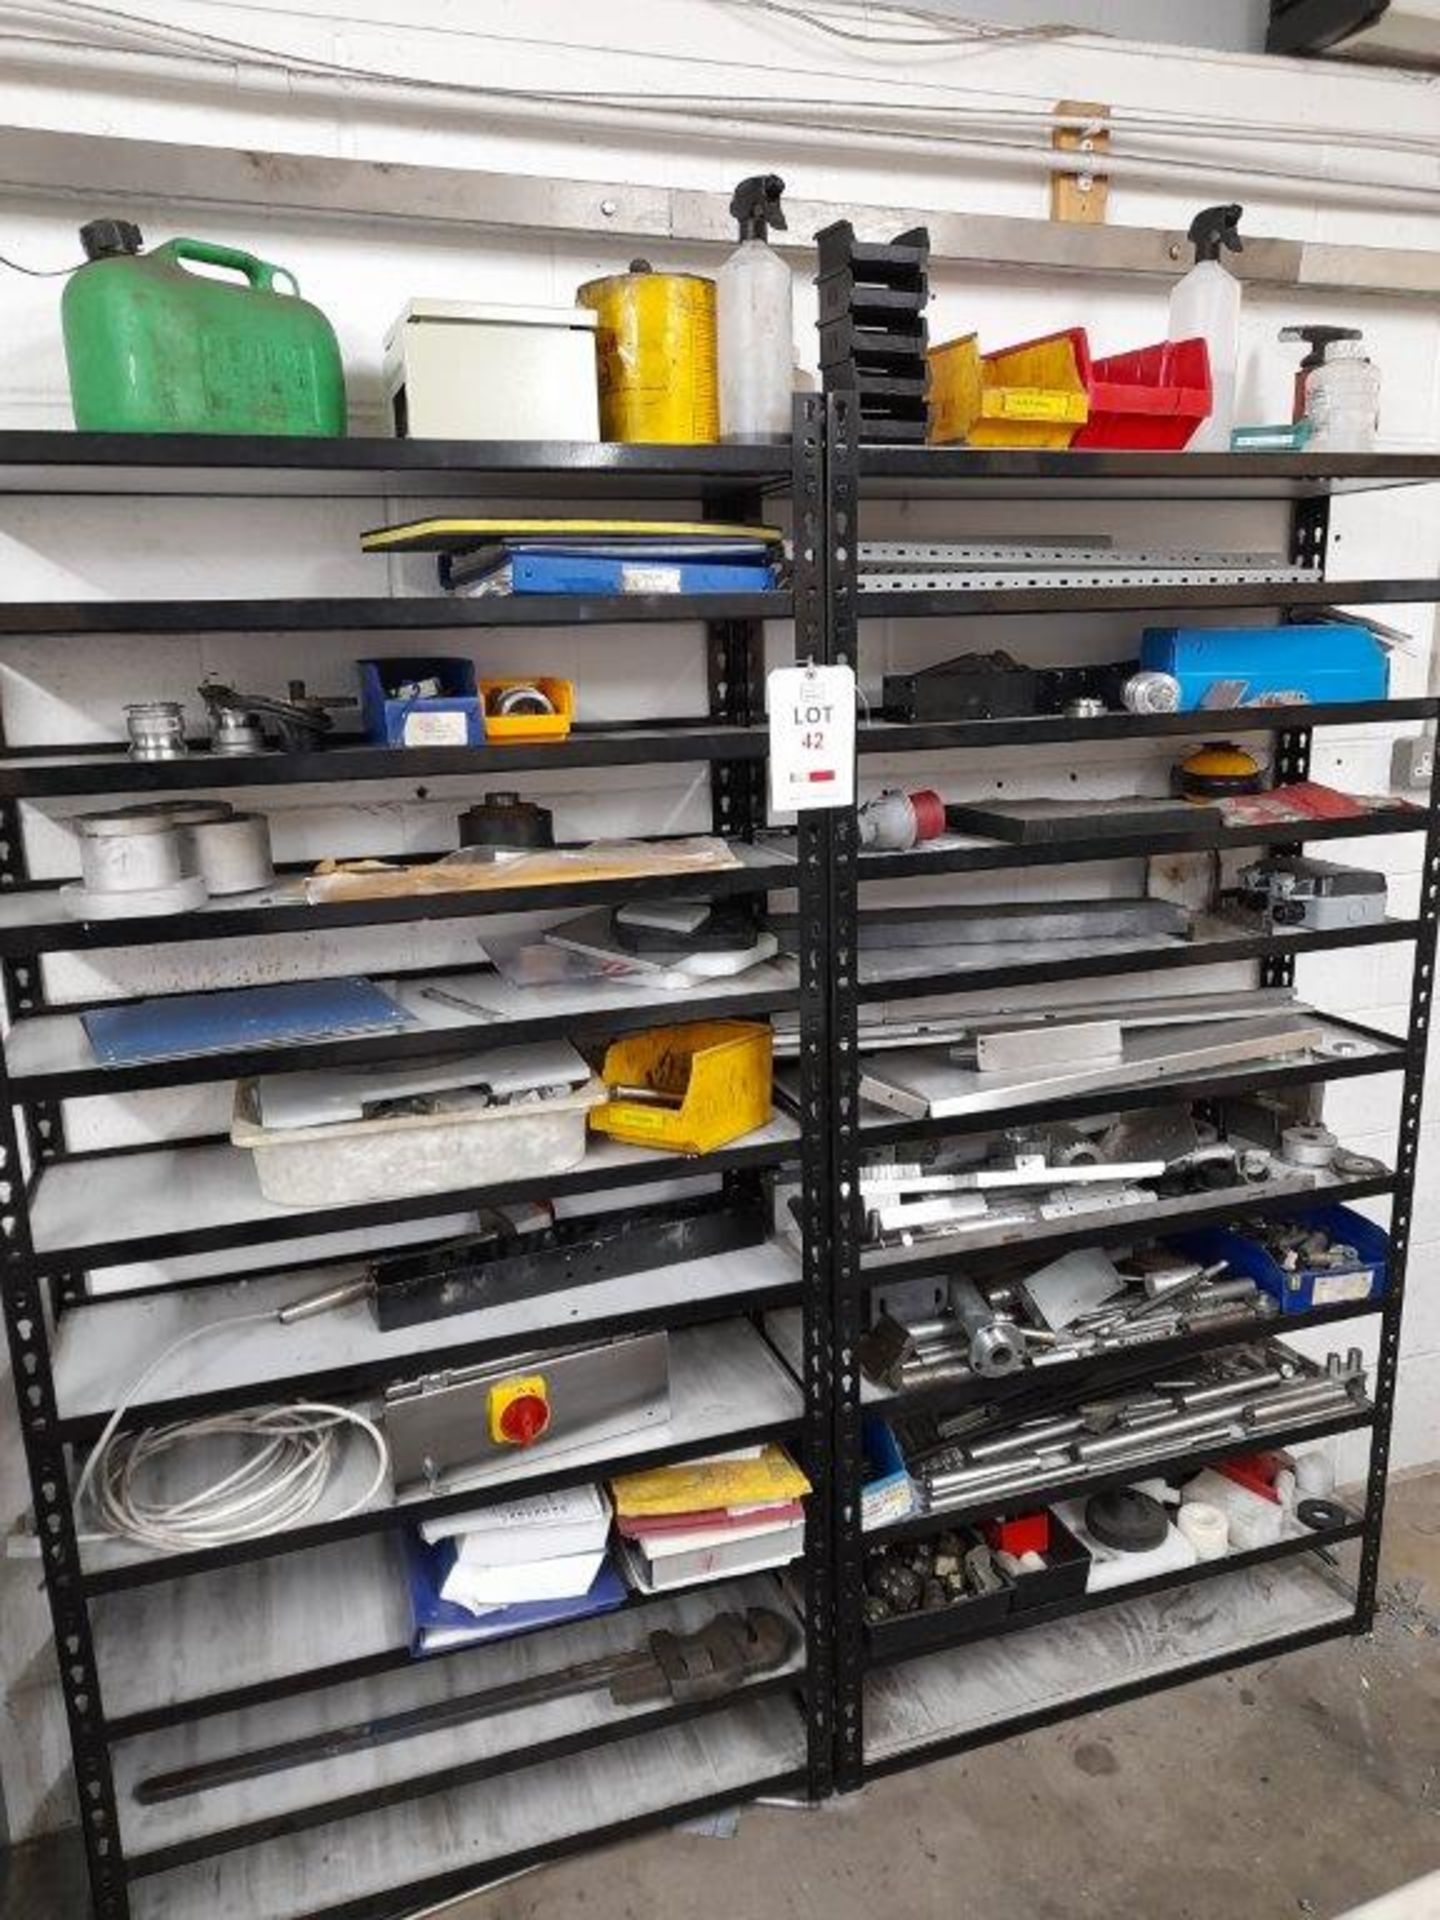 2 x bays of boltless steel shelving and contents including spare parts plus steel double door